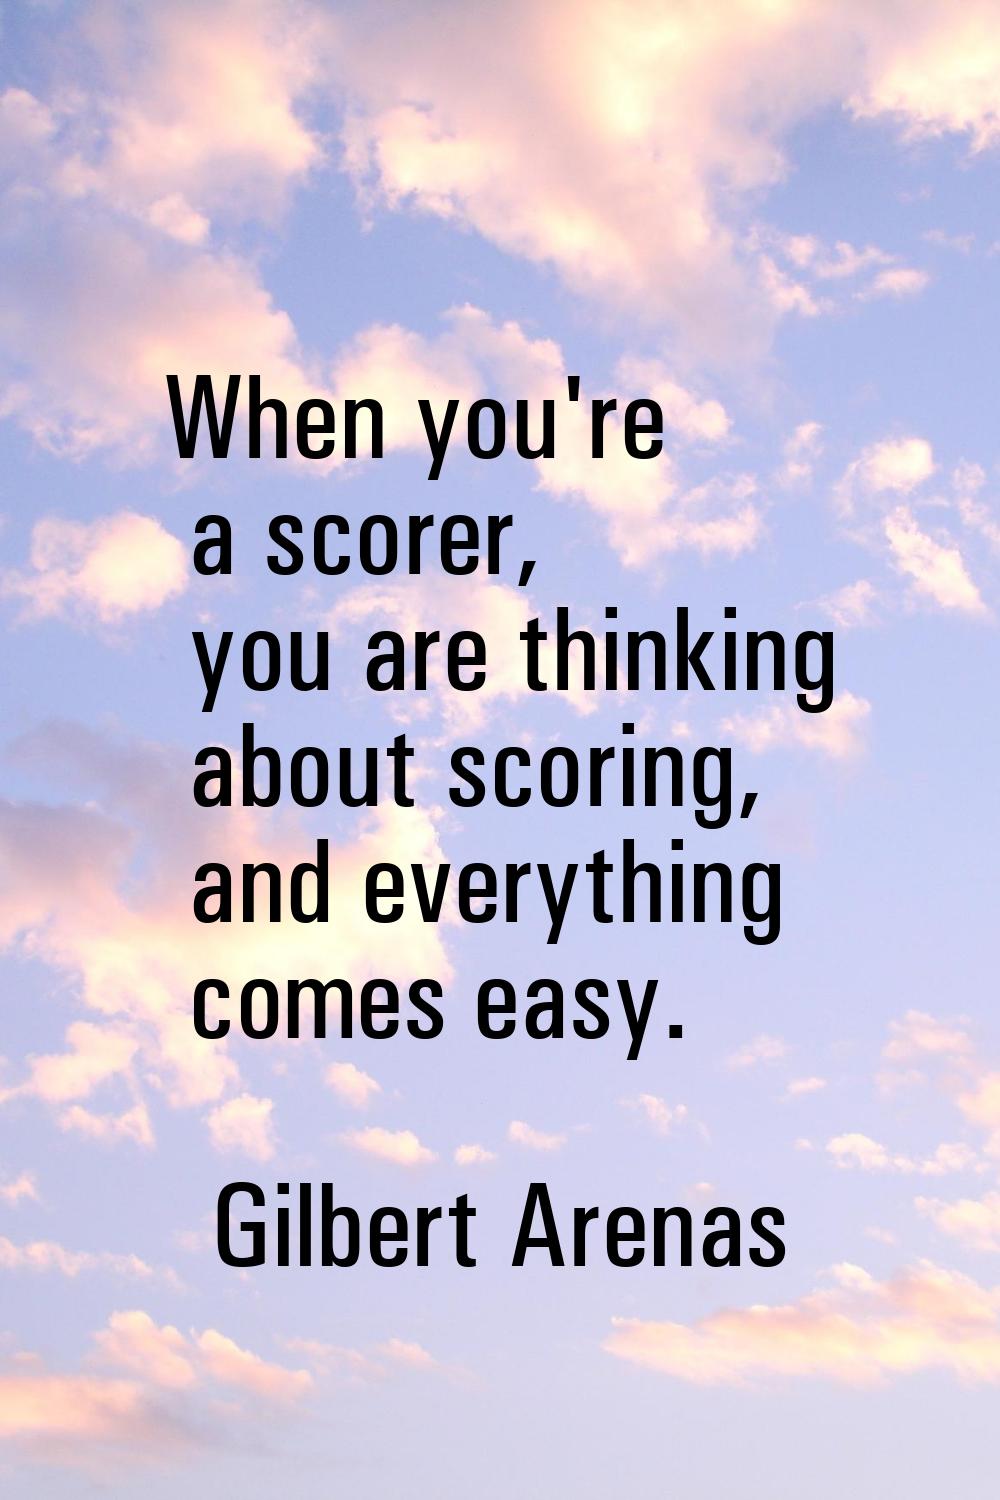 When you're a scorer, you are thinking about scoring, and everything comes easy.